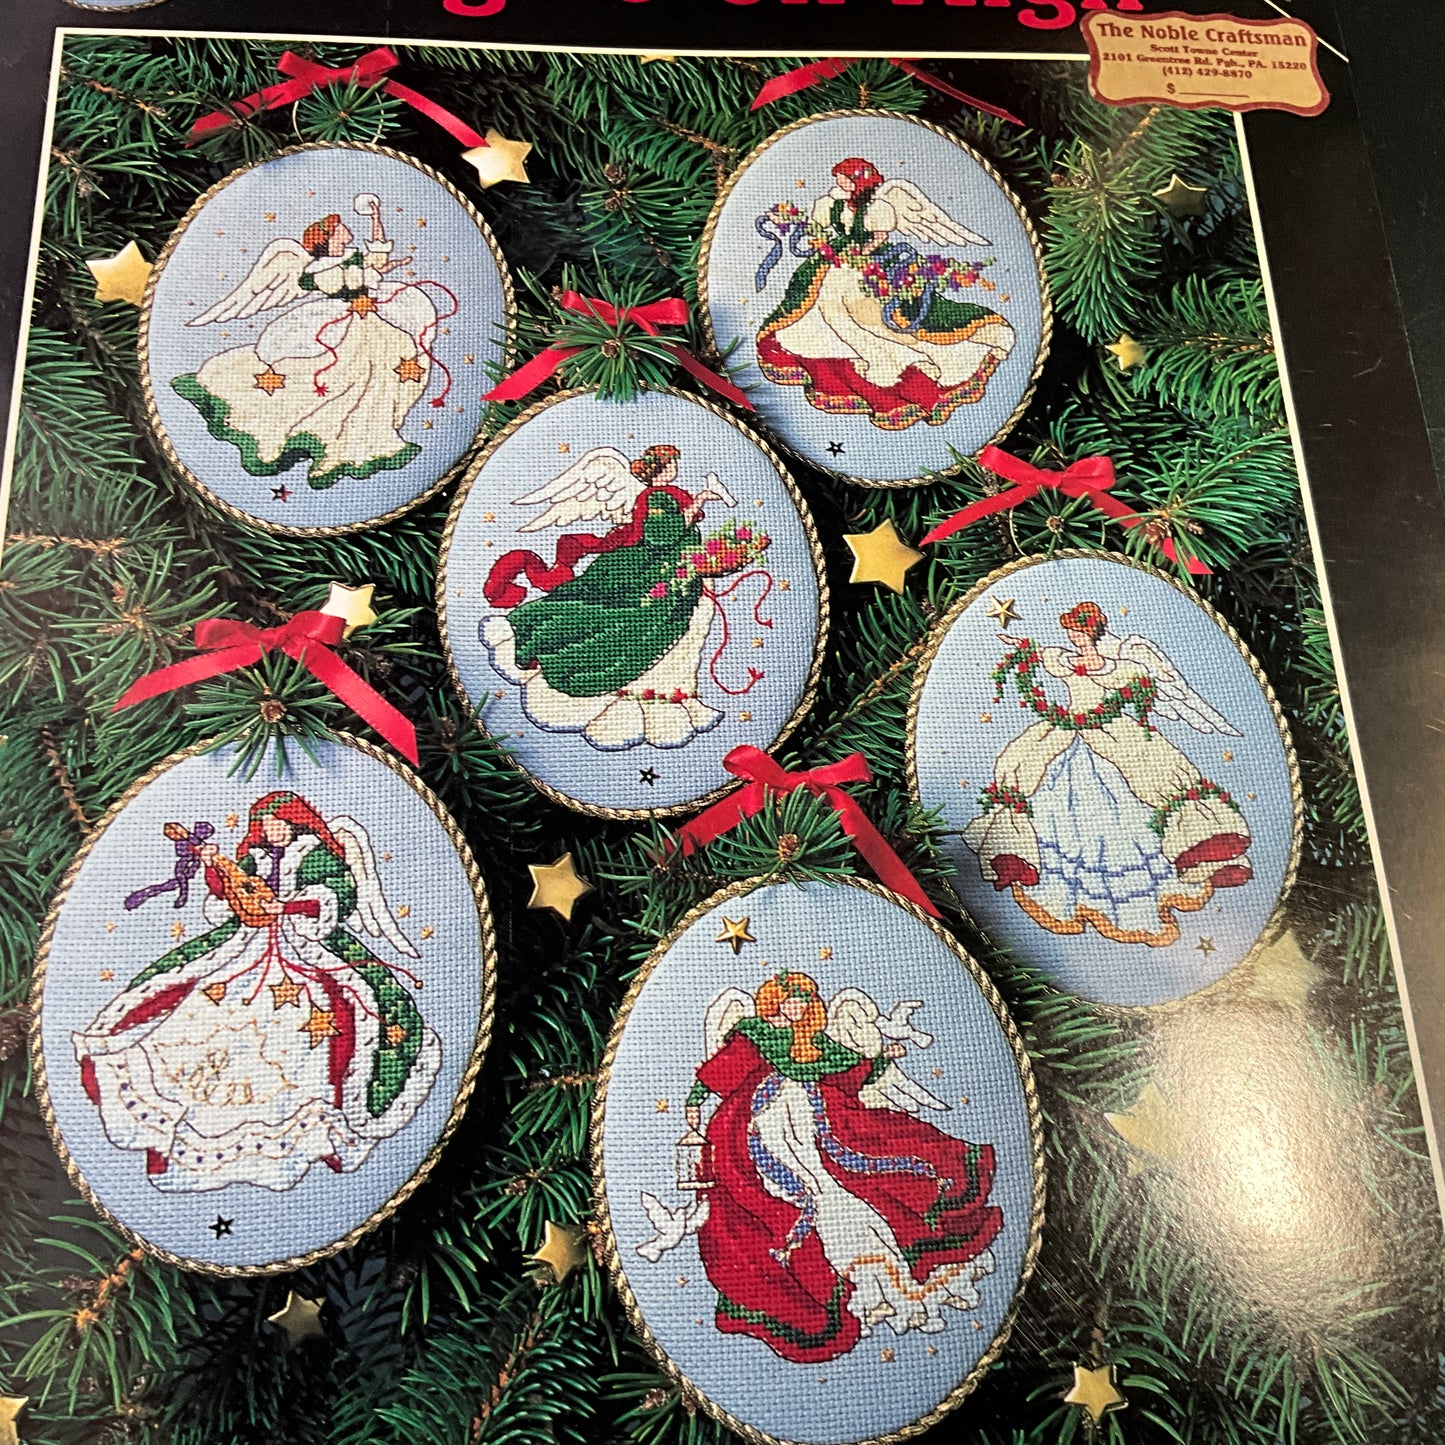 Dimensions choice Christmas counted cross stitch charts see pictures and variations*